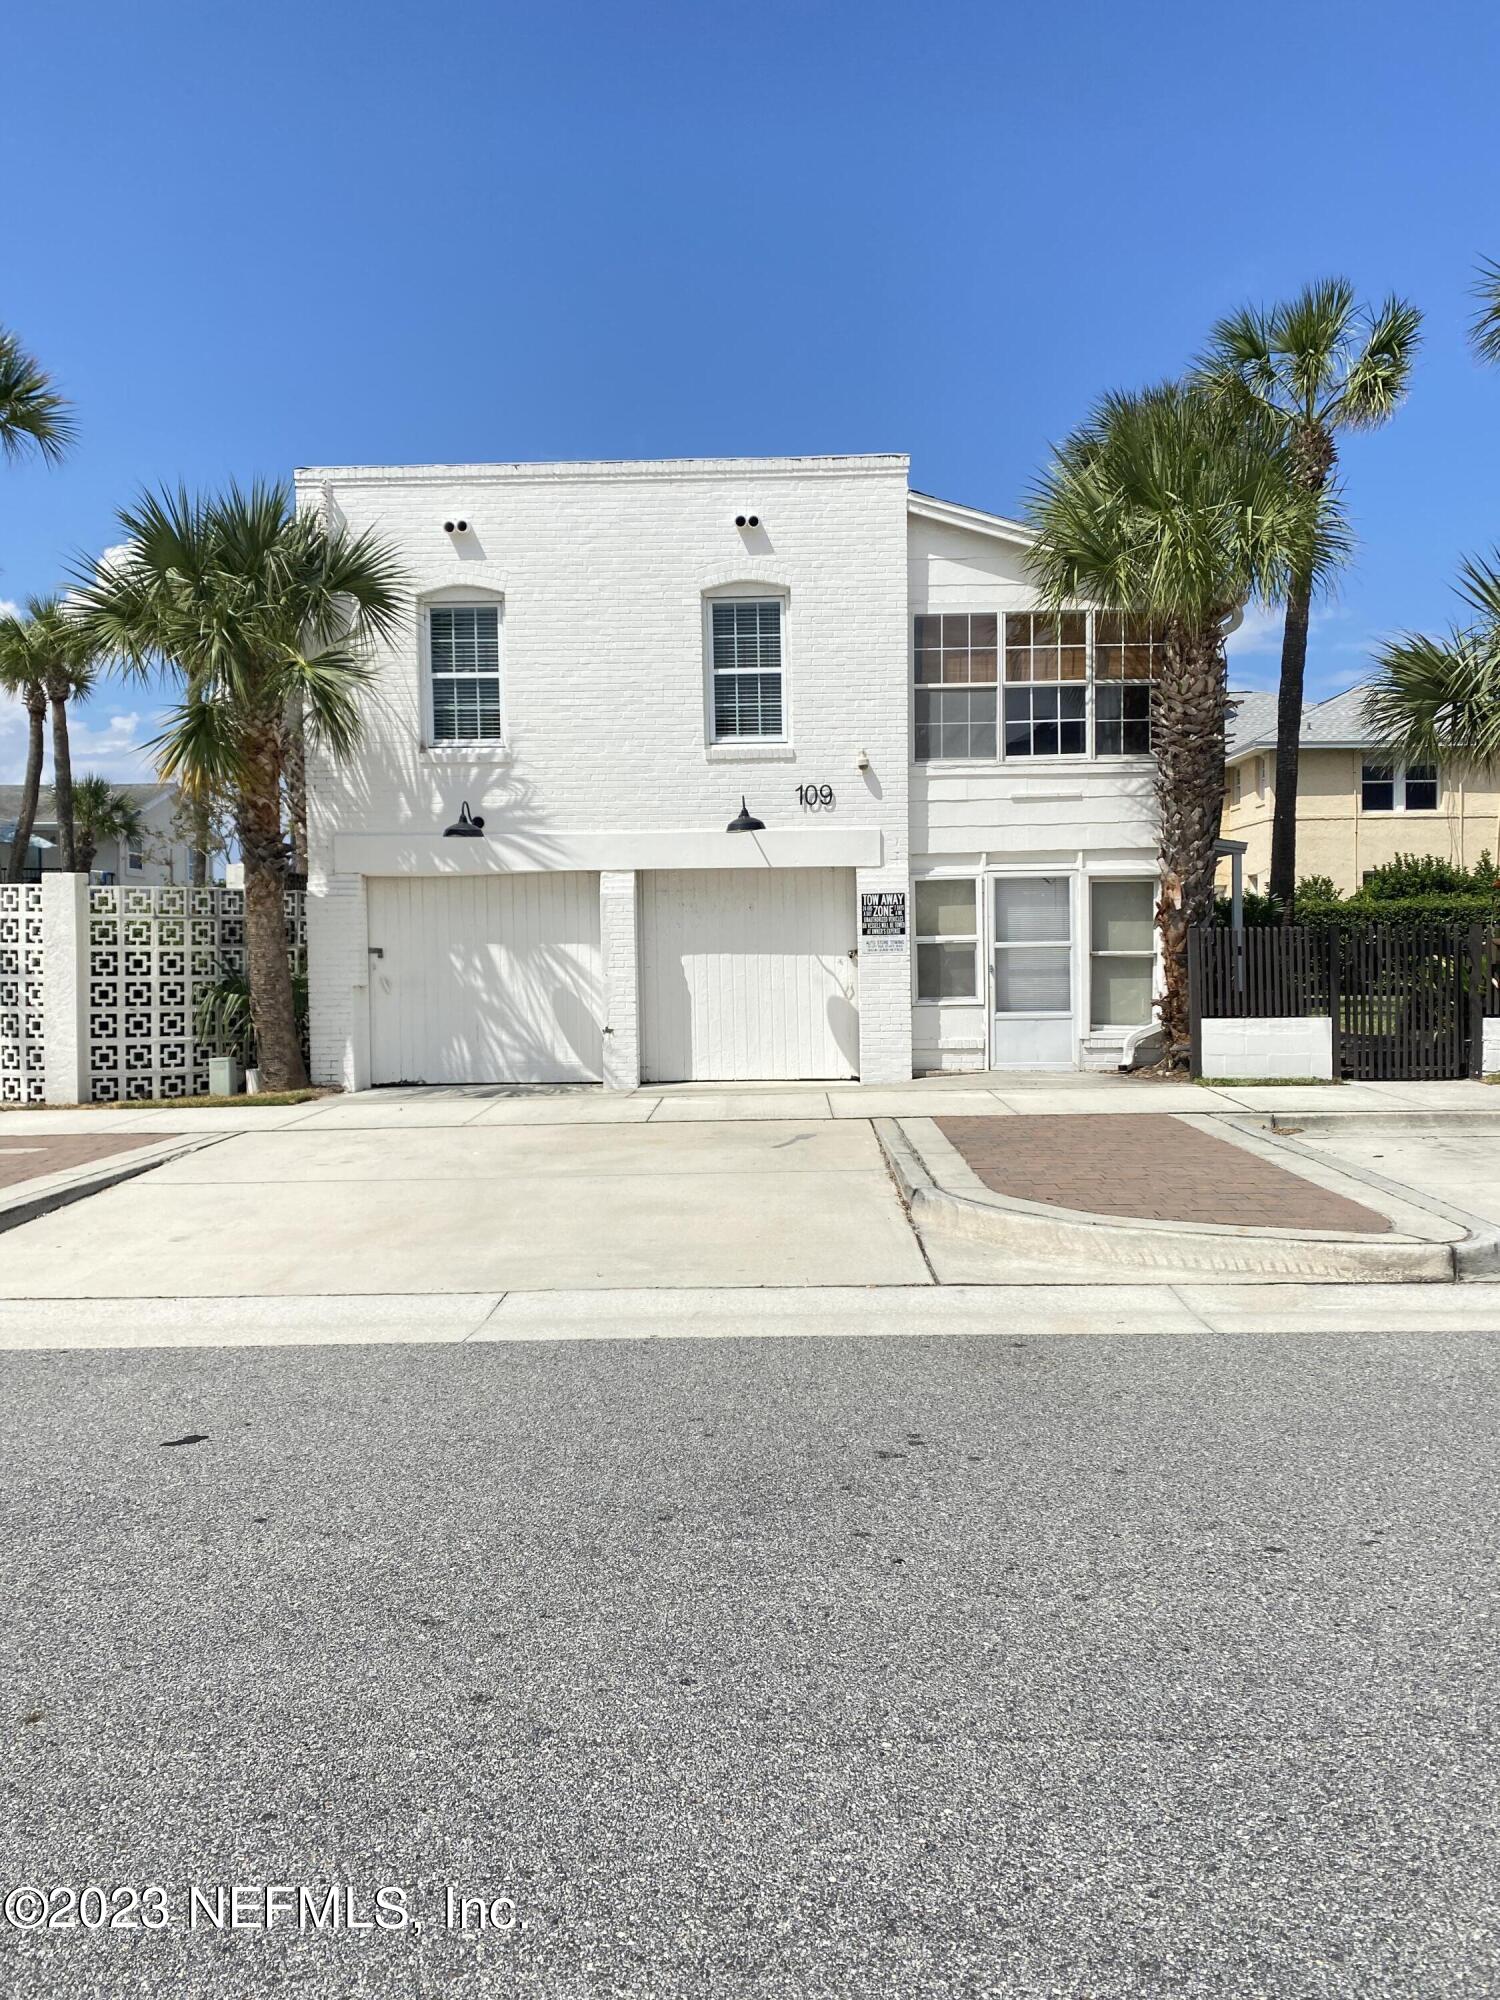 JACKSONVILLE BEACH, FL home for sale located at 109 1ST AVE S 2ND FLOOR UNIT UNIT 2ND FLOOR , JACKSONVILLE BEACH, FL 32250